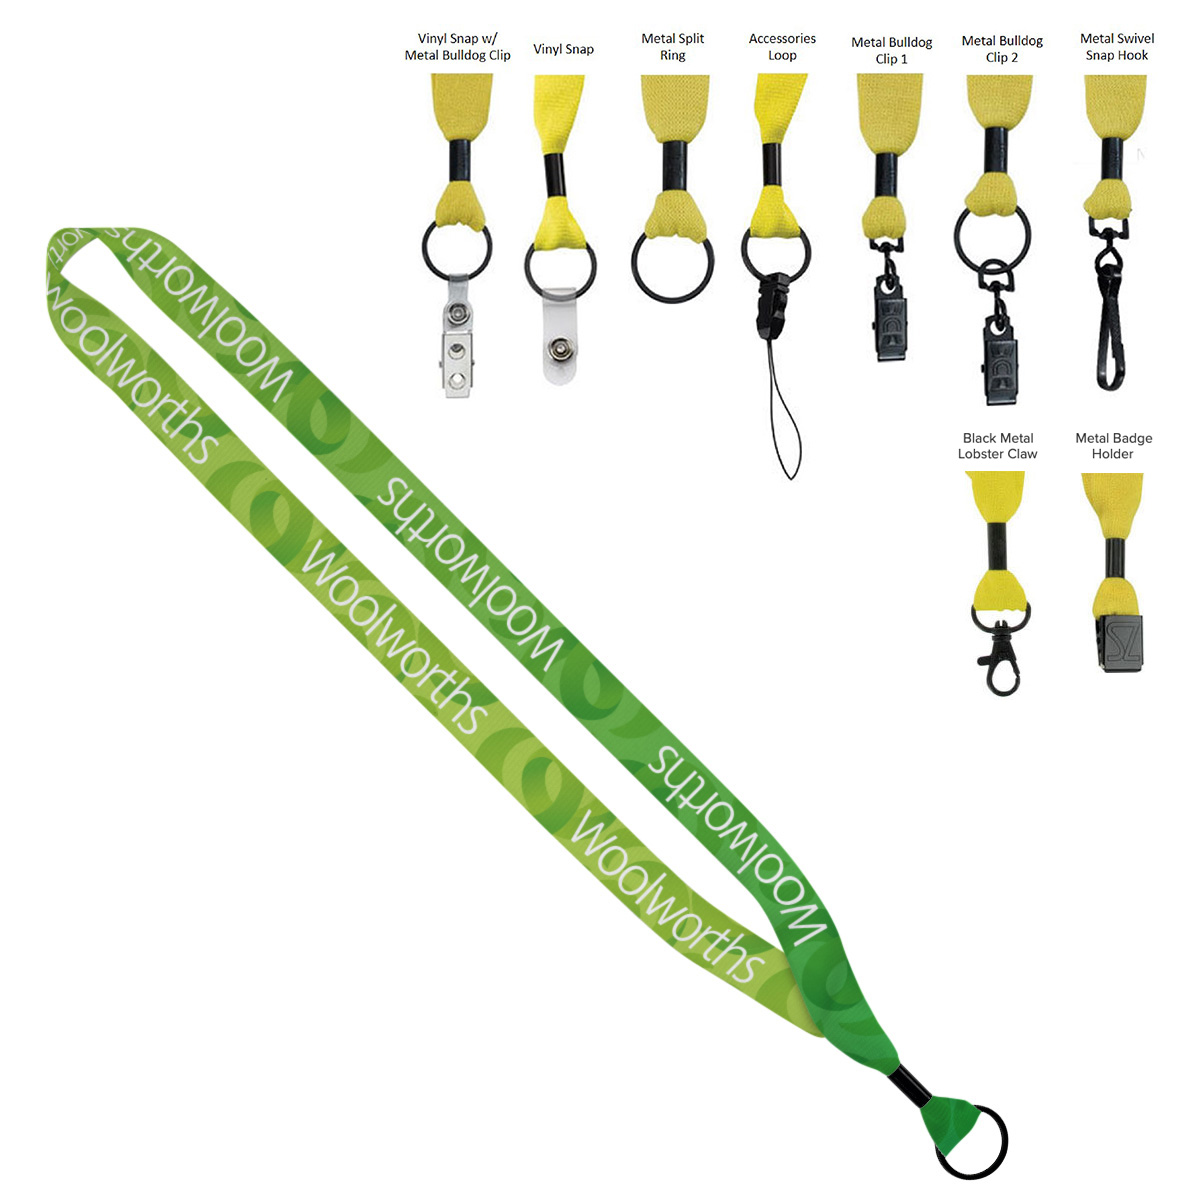 green lanyard college swag with different attachment options